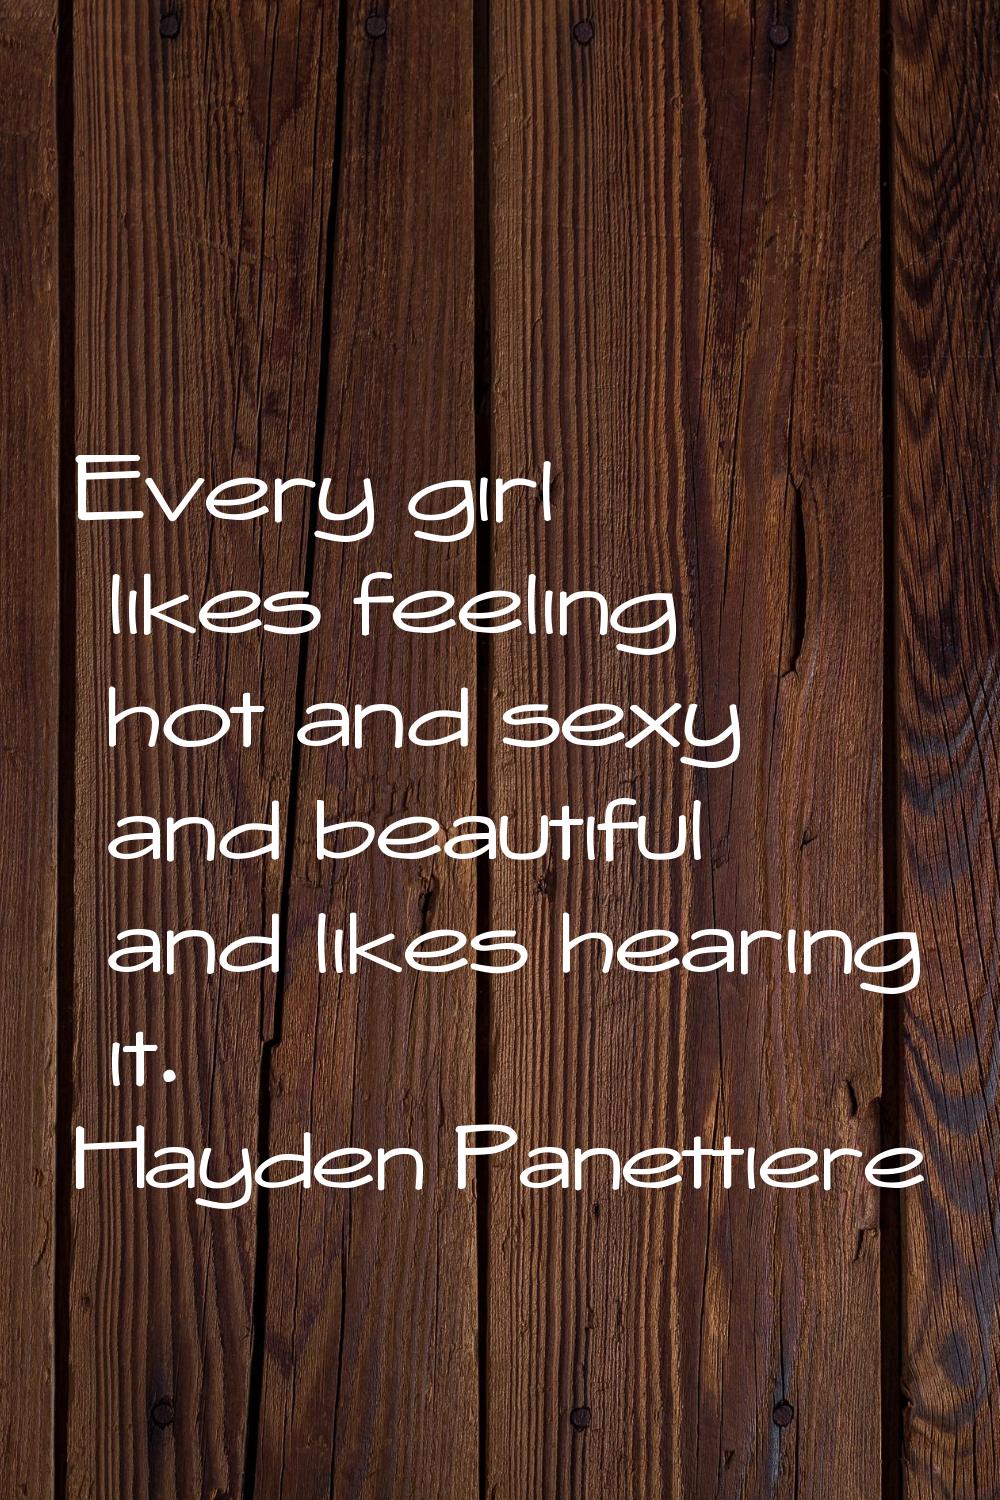 Every girl likes feeling hot and sexy and beautiful and likes hearing it.